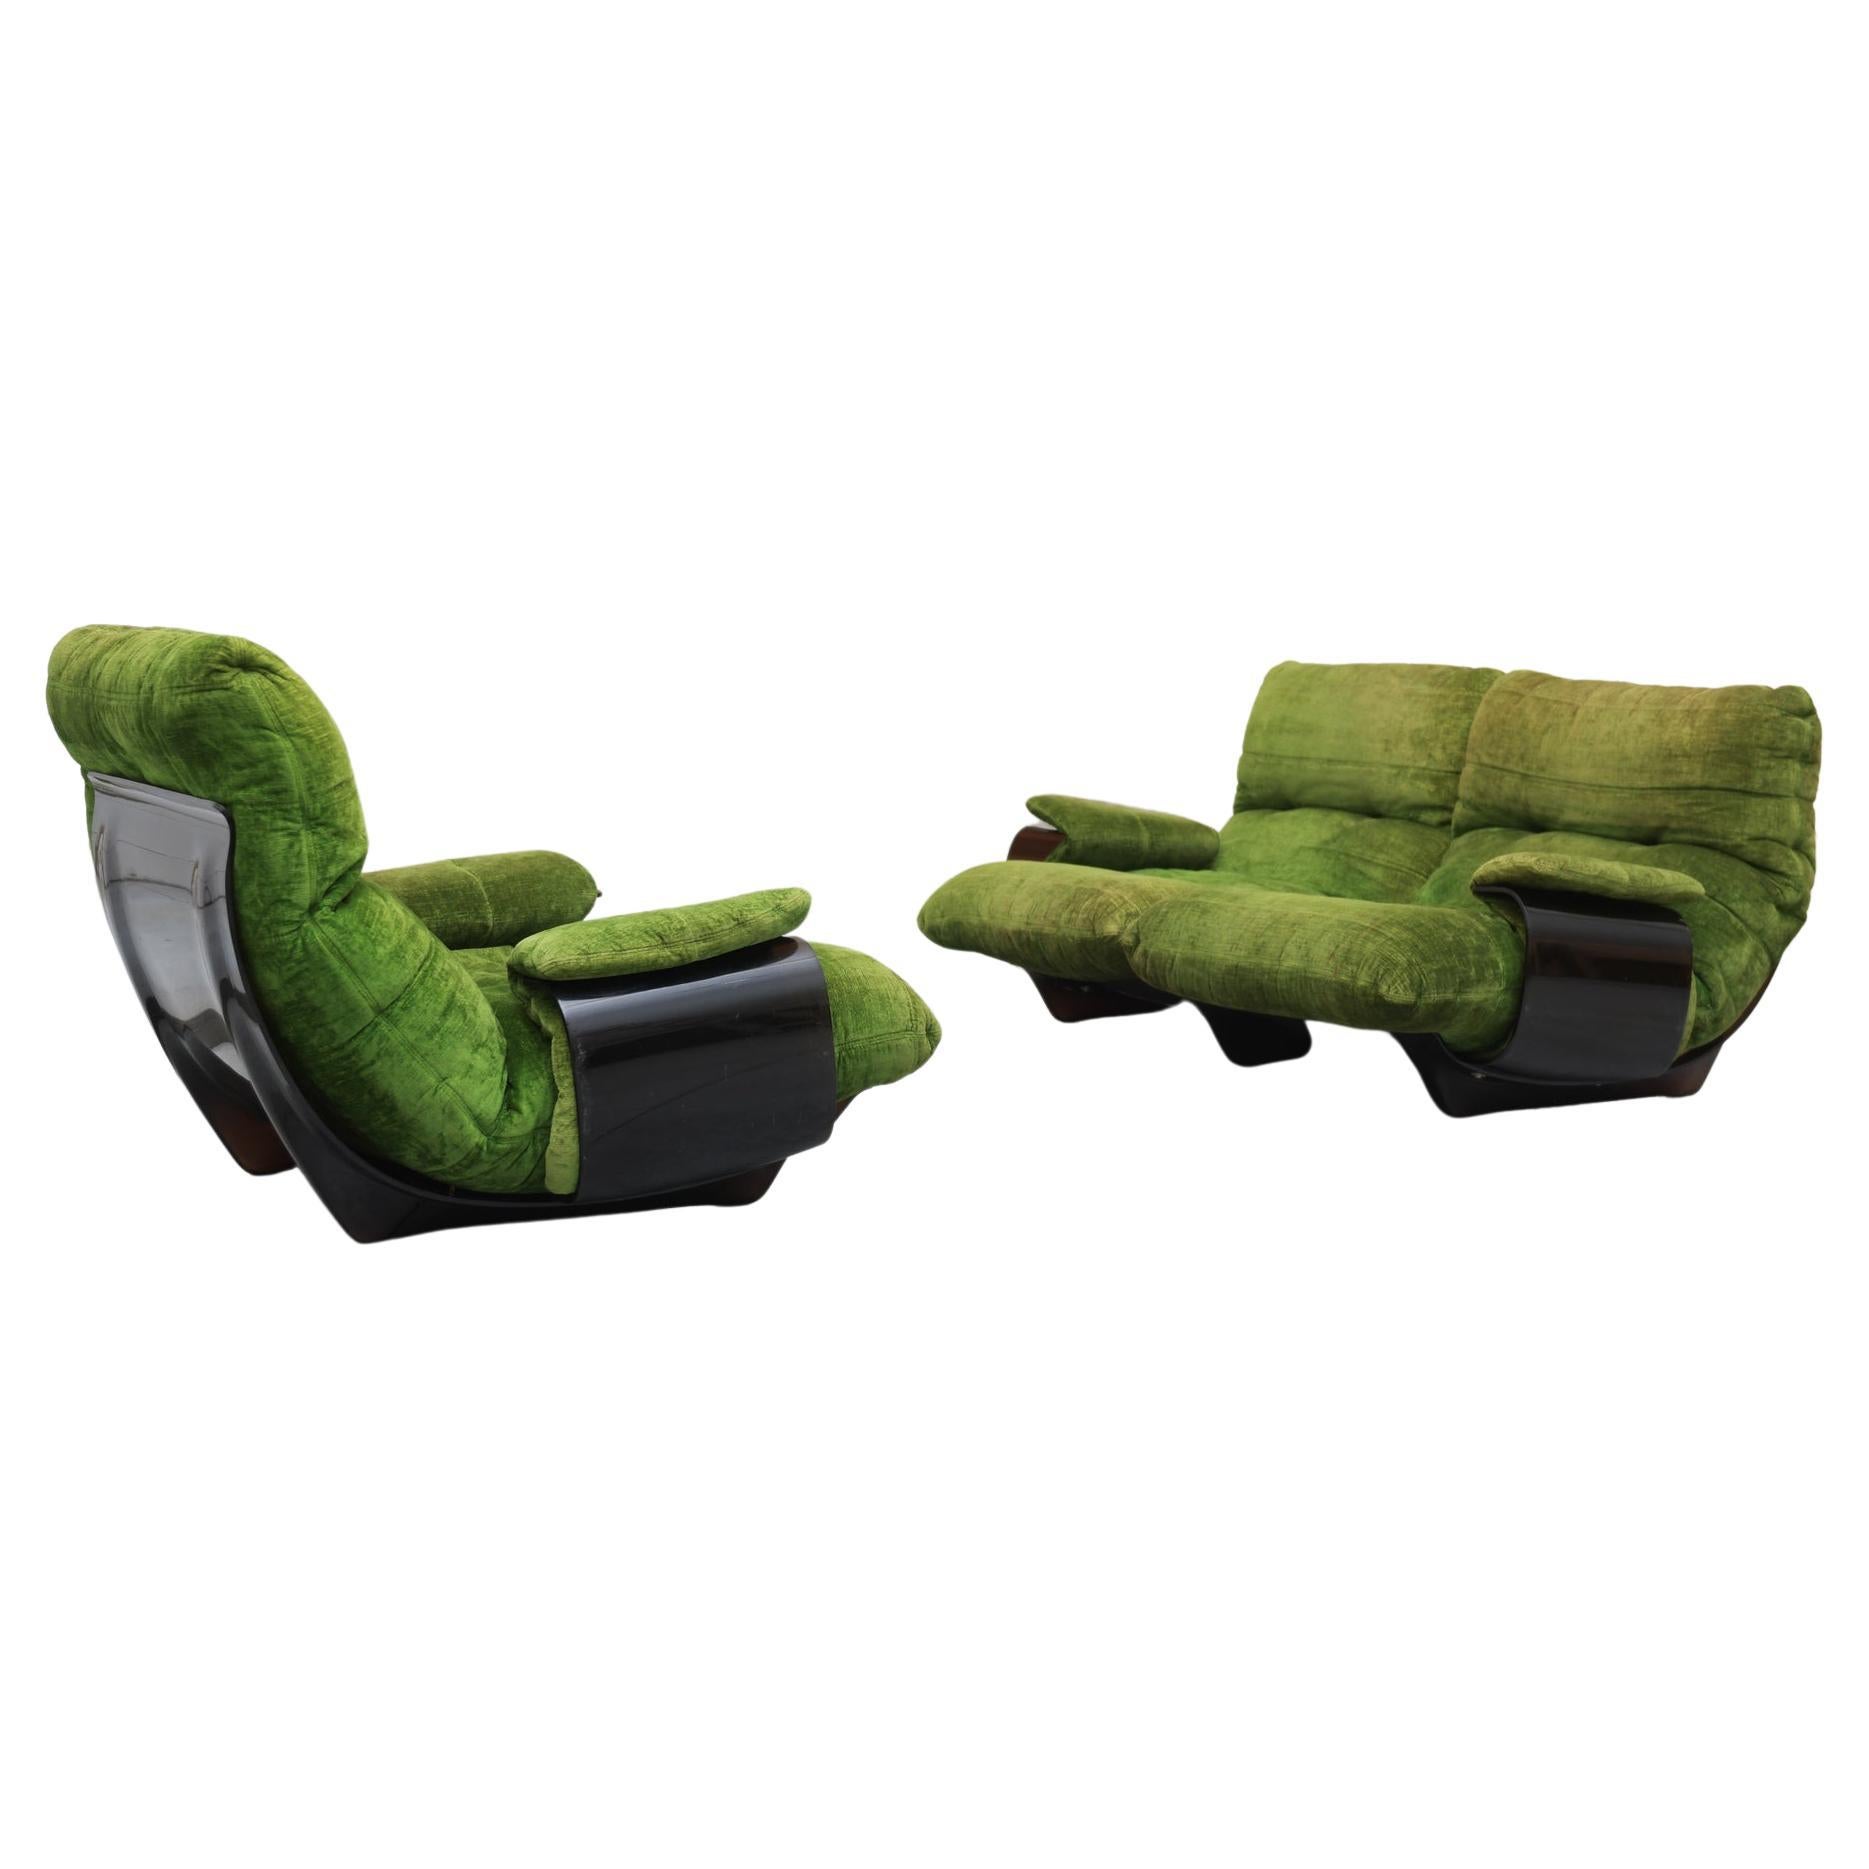 Stunning Marsala set in green velvet and brown plexi.
Designed by Michel Ducaroy for Ligne Roset.

Good vintage condition. No damage. Normal signs of use.